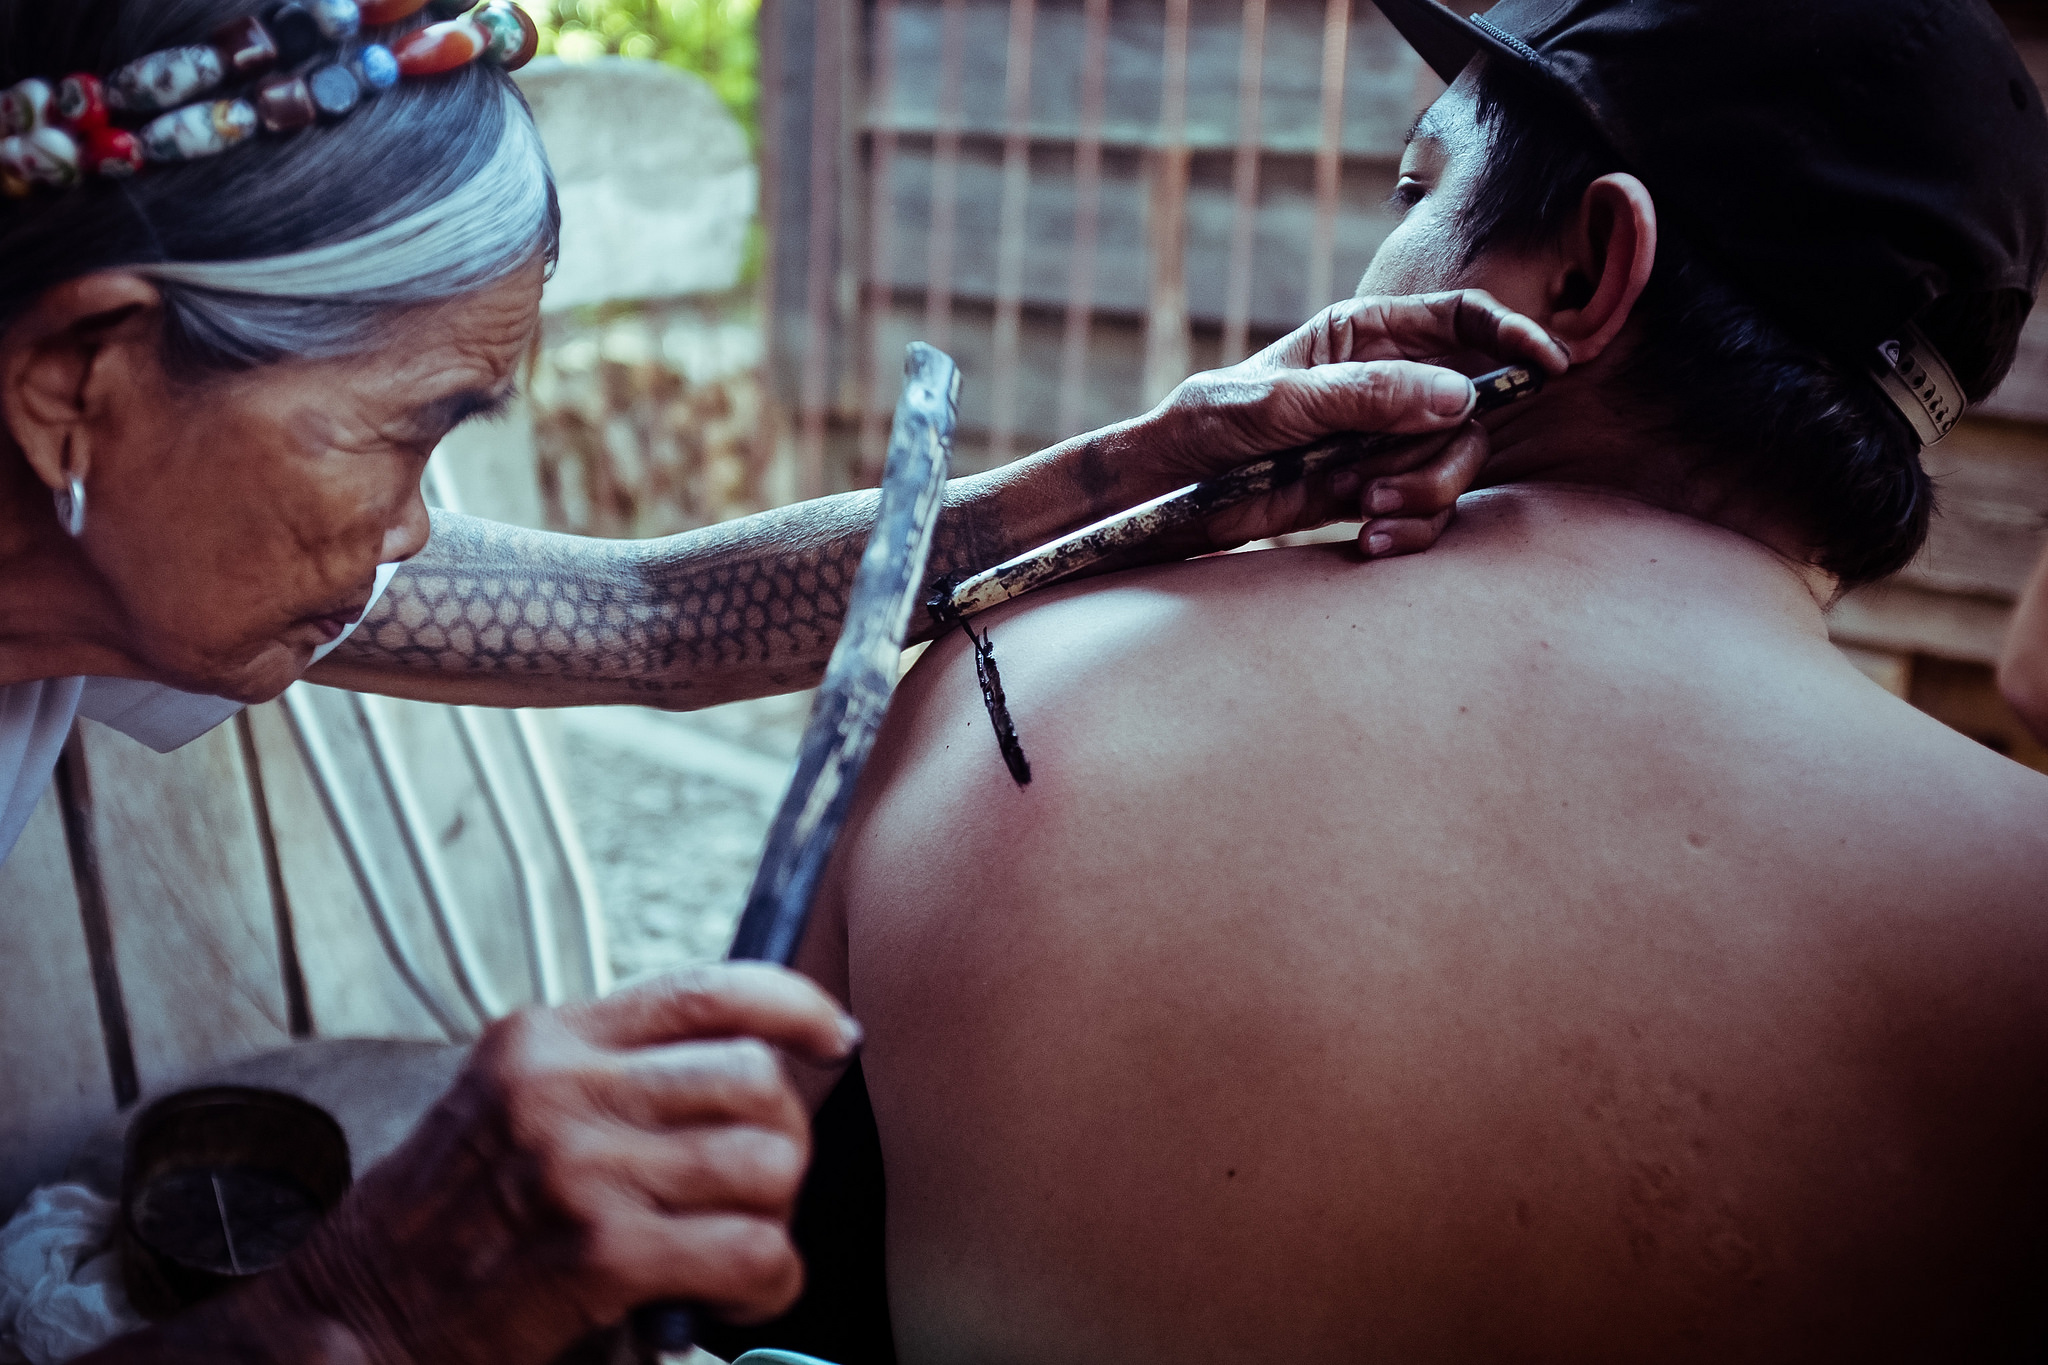 <ul><li><p>CAR (Kalinga)</p></li><li><p>The practice of tattooing by using a thorn attached to a stick and a mixture of charcoal and water. In the tribes of Kalinga, men earn tattoos to show pride and achievements, while women get it to beautify themselves and show wealth</p></li></ul>